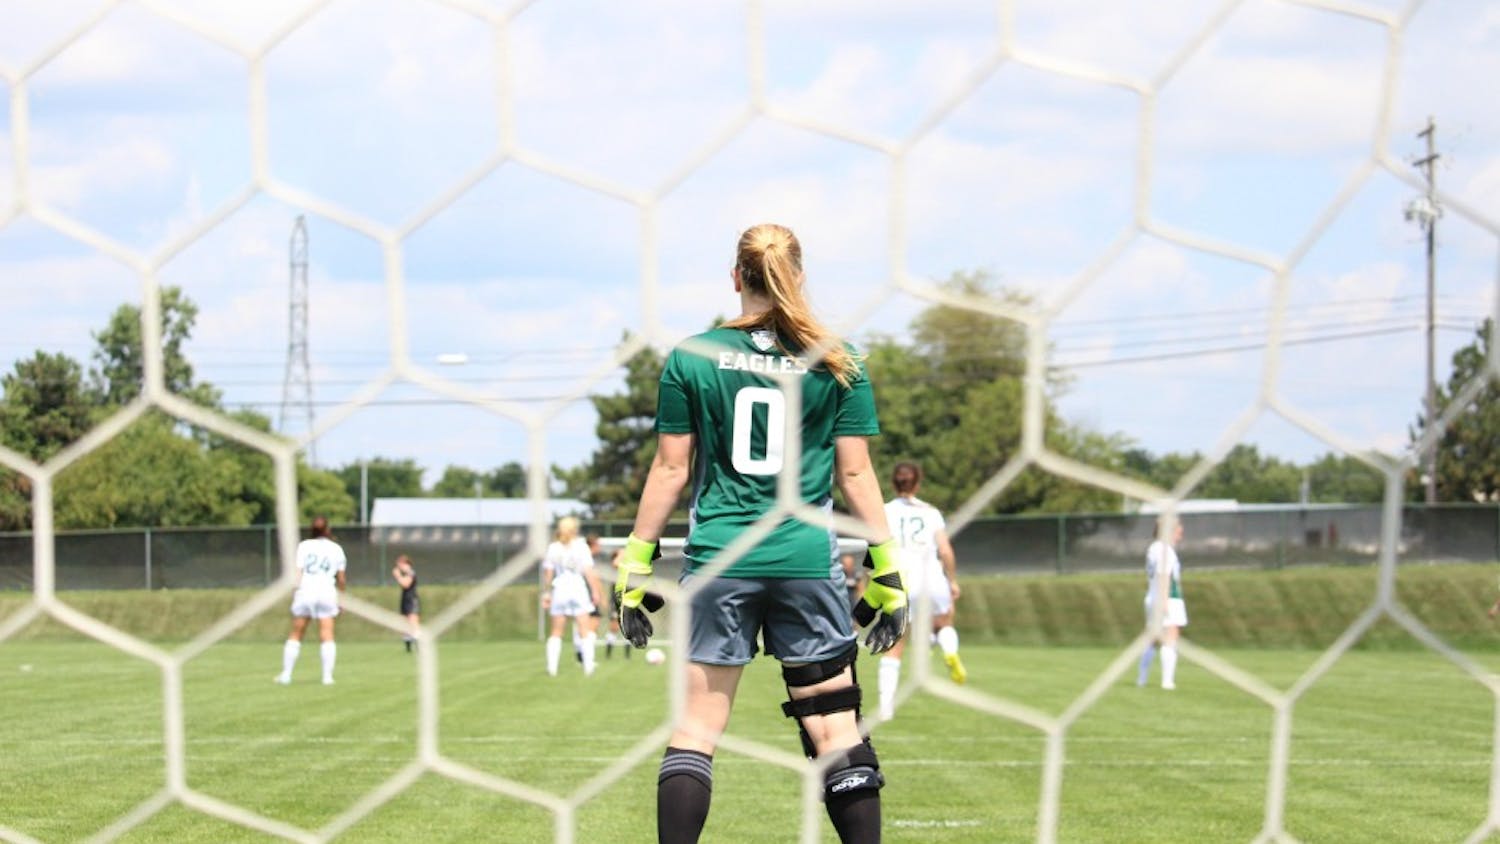 Senior goalkeeper Megan McCabe looks over the field as her team gets ready to kick-off.